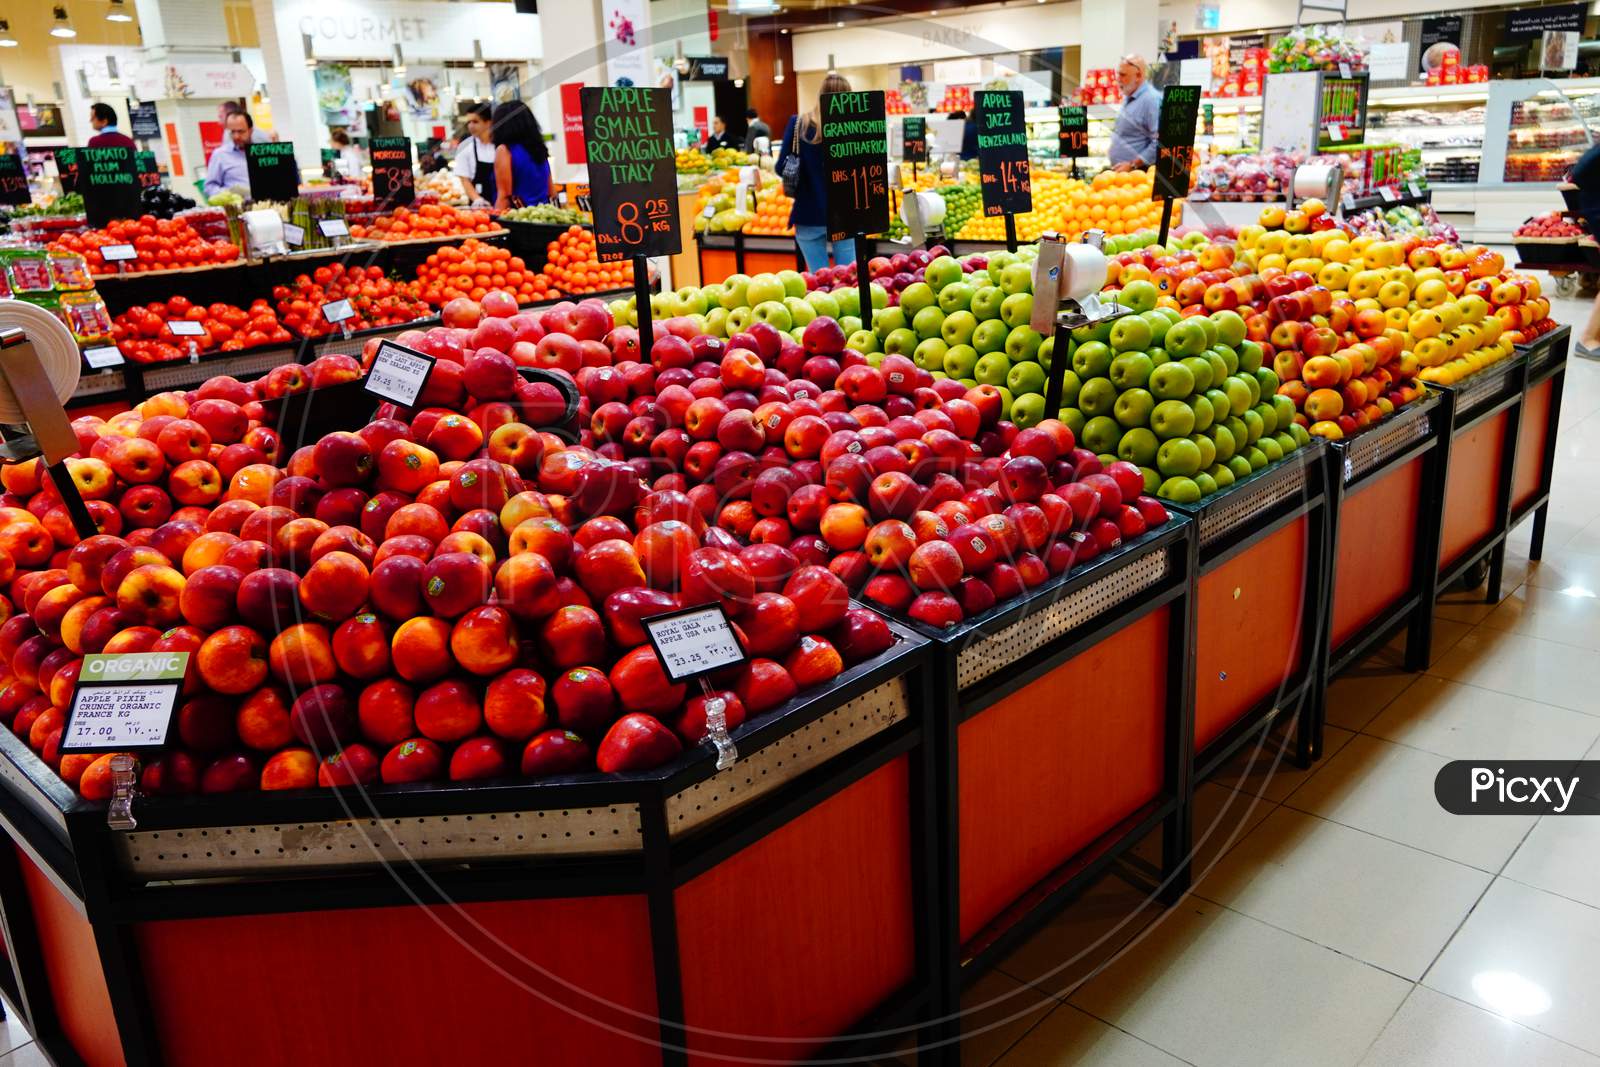 Bunch Of Red, Yellow And Green Apples On Boxes In Supermarket. Apples Being Sold At Public Market. Organic Food Fresh Apples In Shop, Store  - India